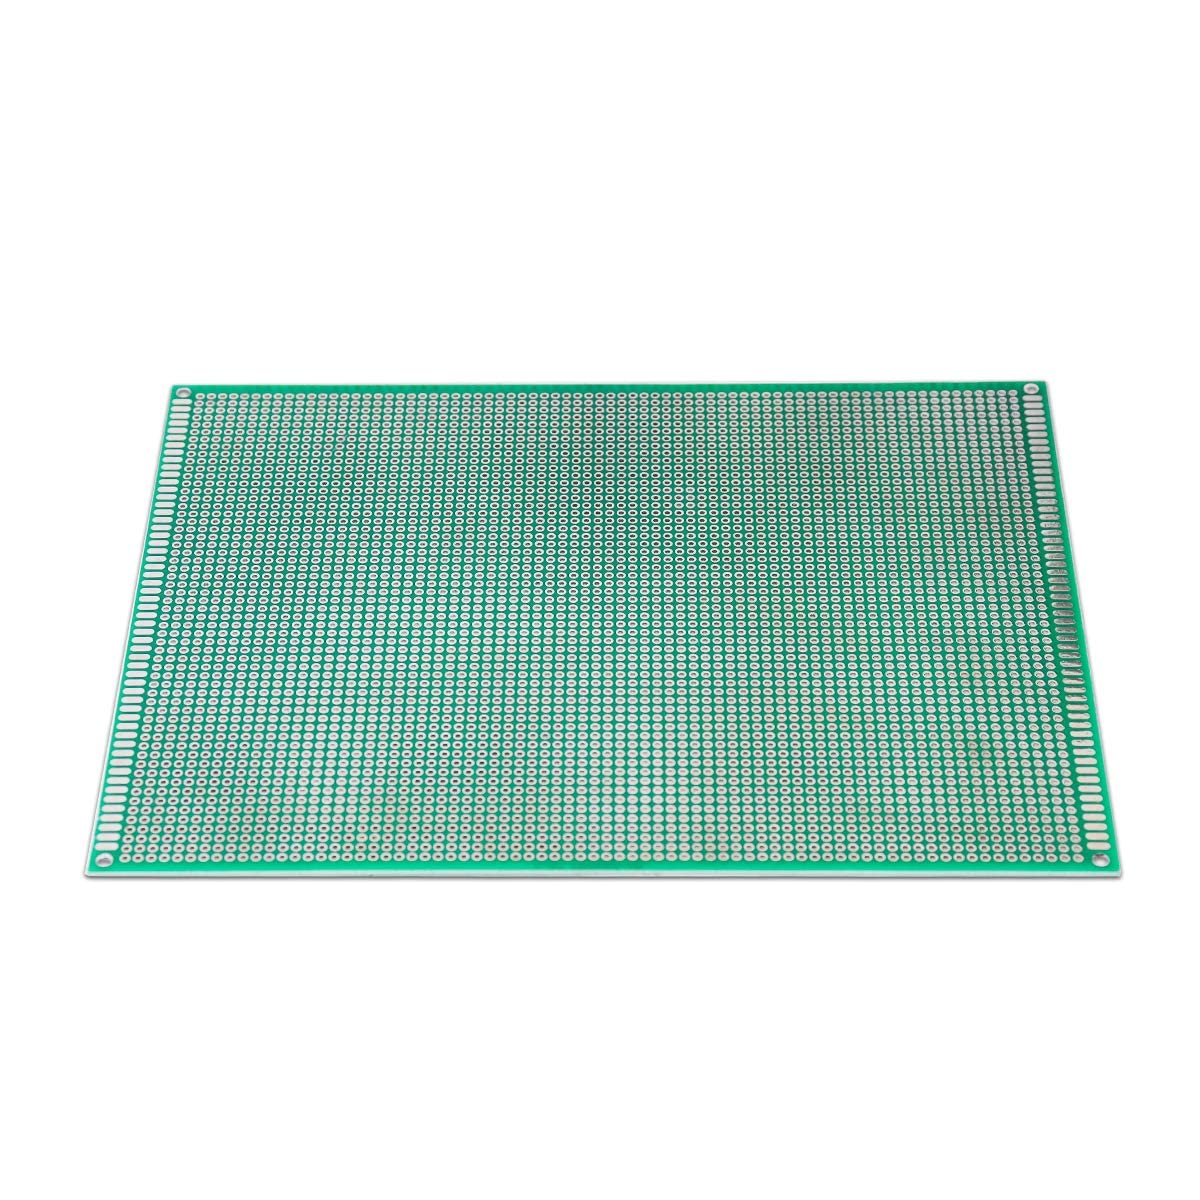 6x4 inch Double Sided Universal PCB Prototype Veroboard Green PCB Board